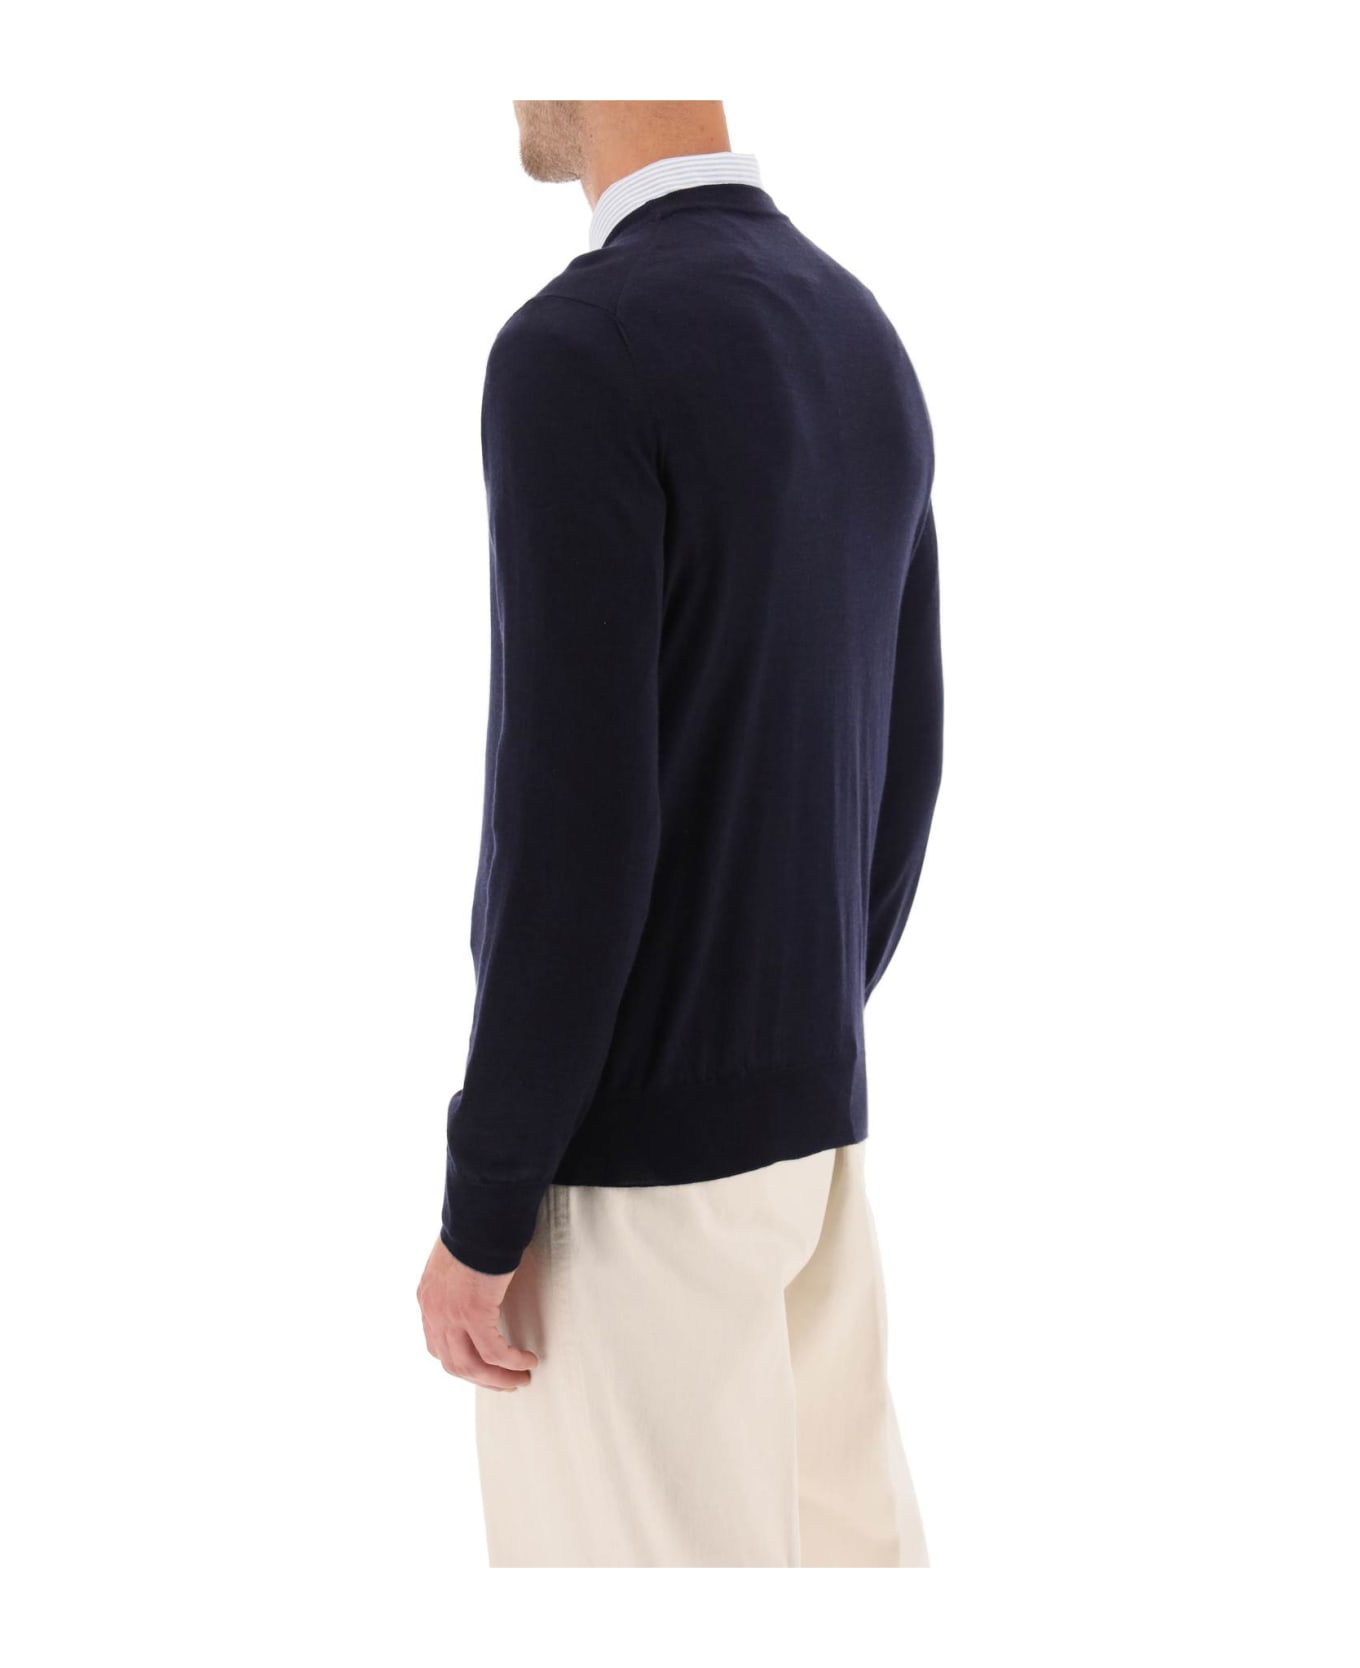 Brunello Cucinelli Wool And Cashmere Blend Sweater - Navy